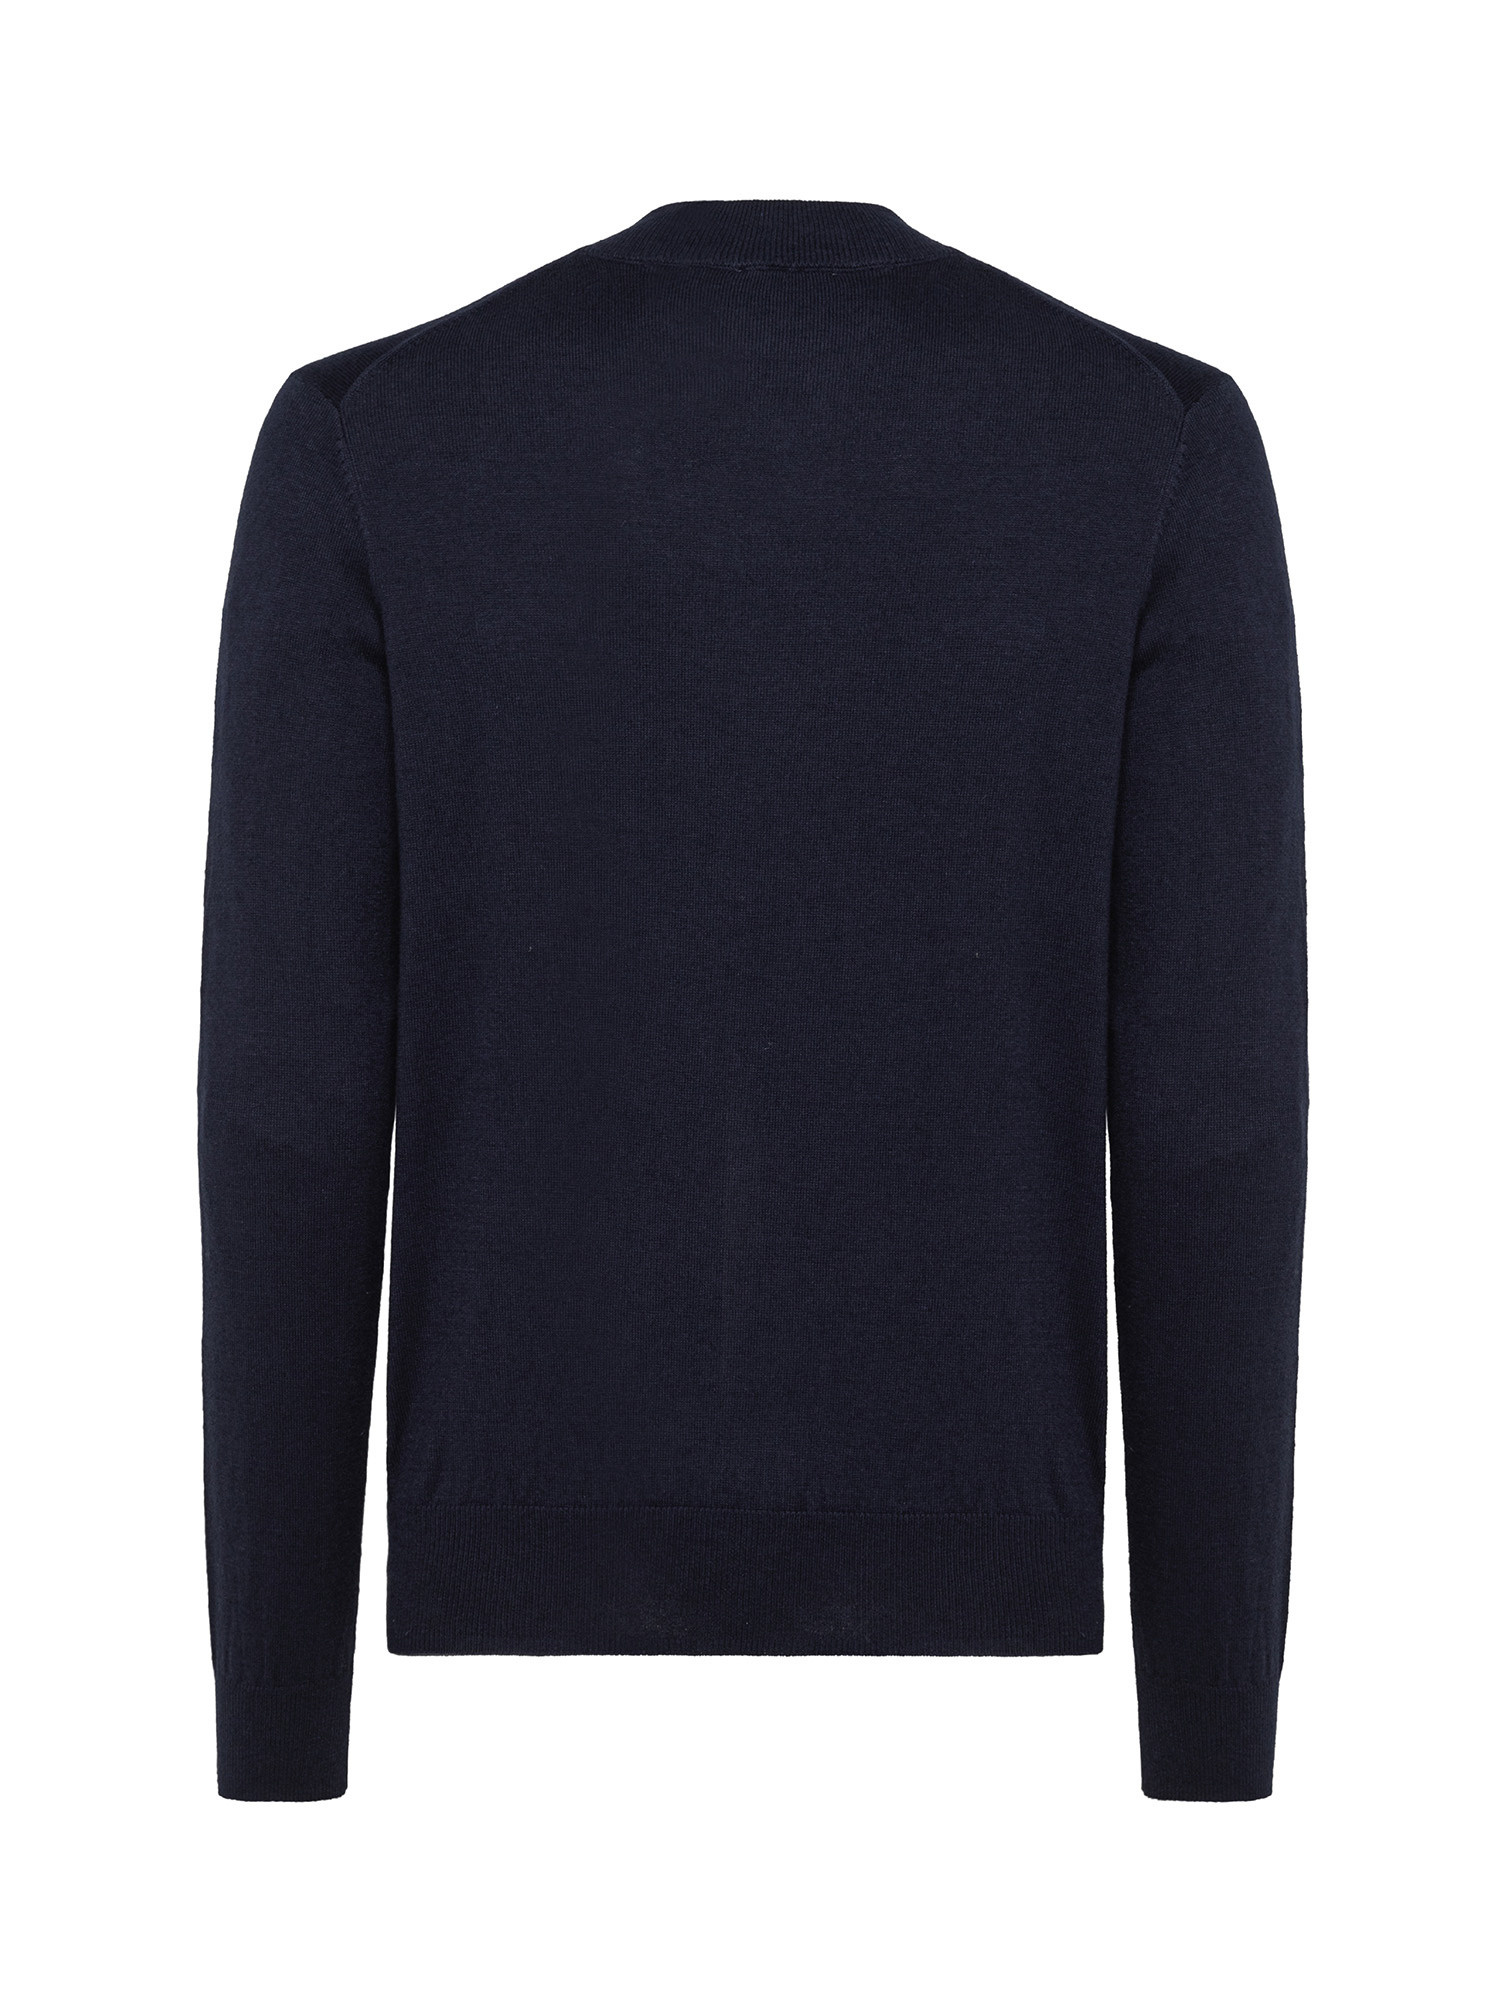 Sweater in cotton and wool blend, Blue, large image number 1